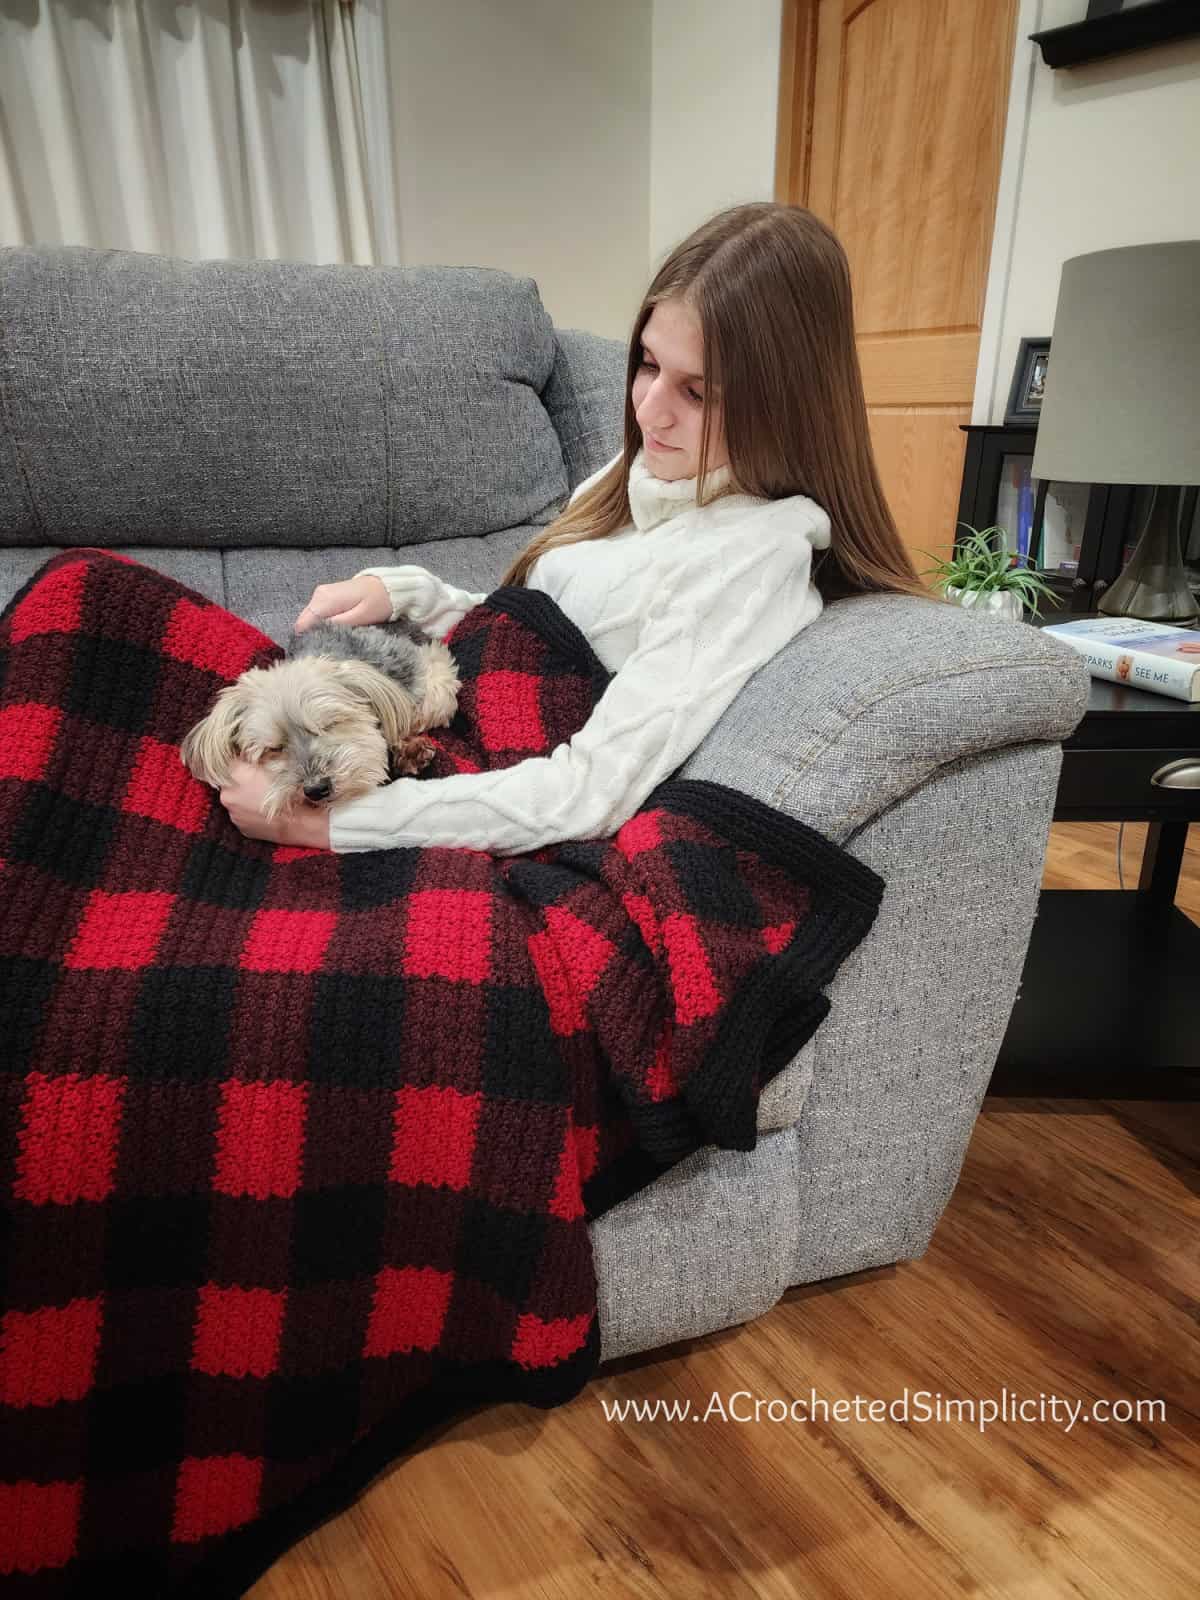 Girl sitting on a couch with a yorkie on her lap and a crochet buffalo plaid blanket.